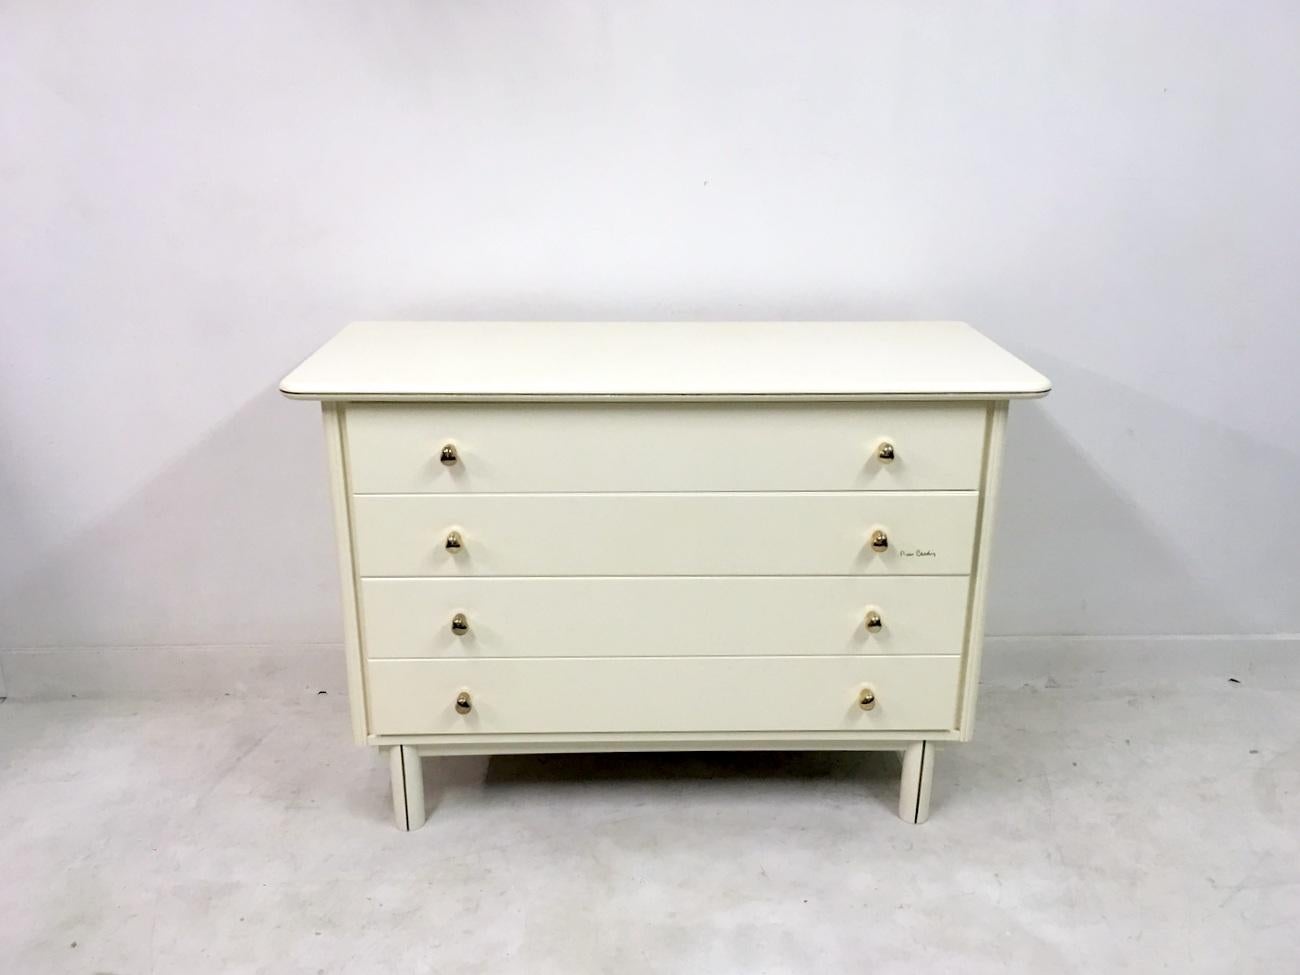 Vintage 1980s Chest of Drawers by Pierre Cardin In Good Condition For Sale In London, London